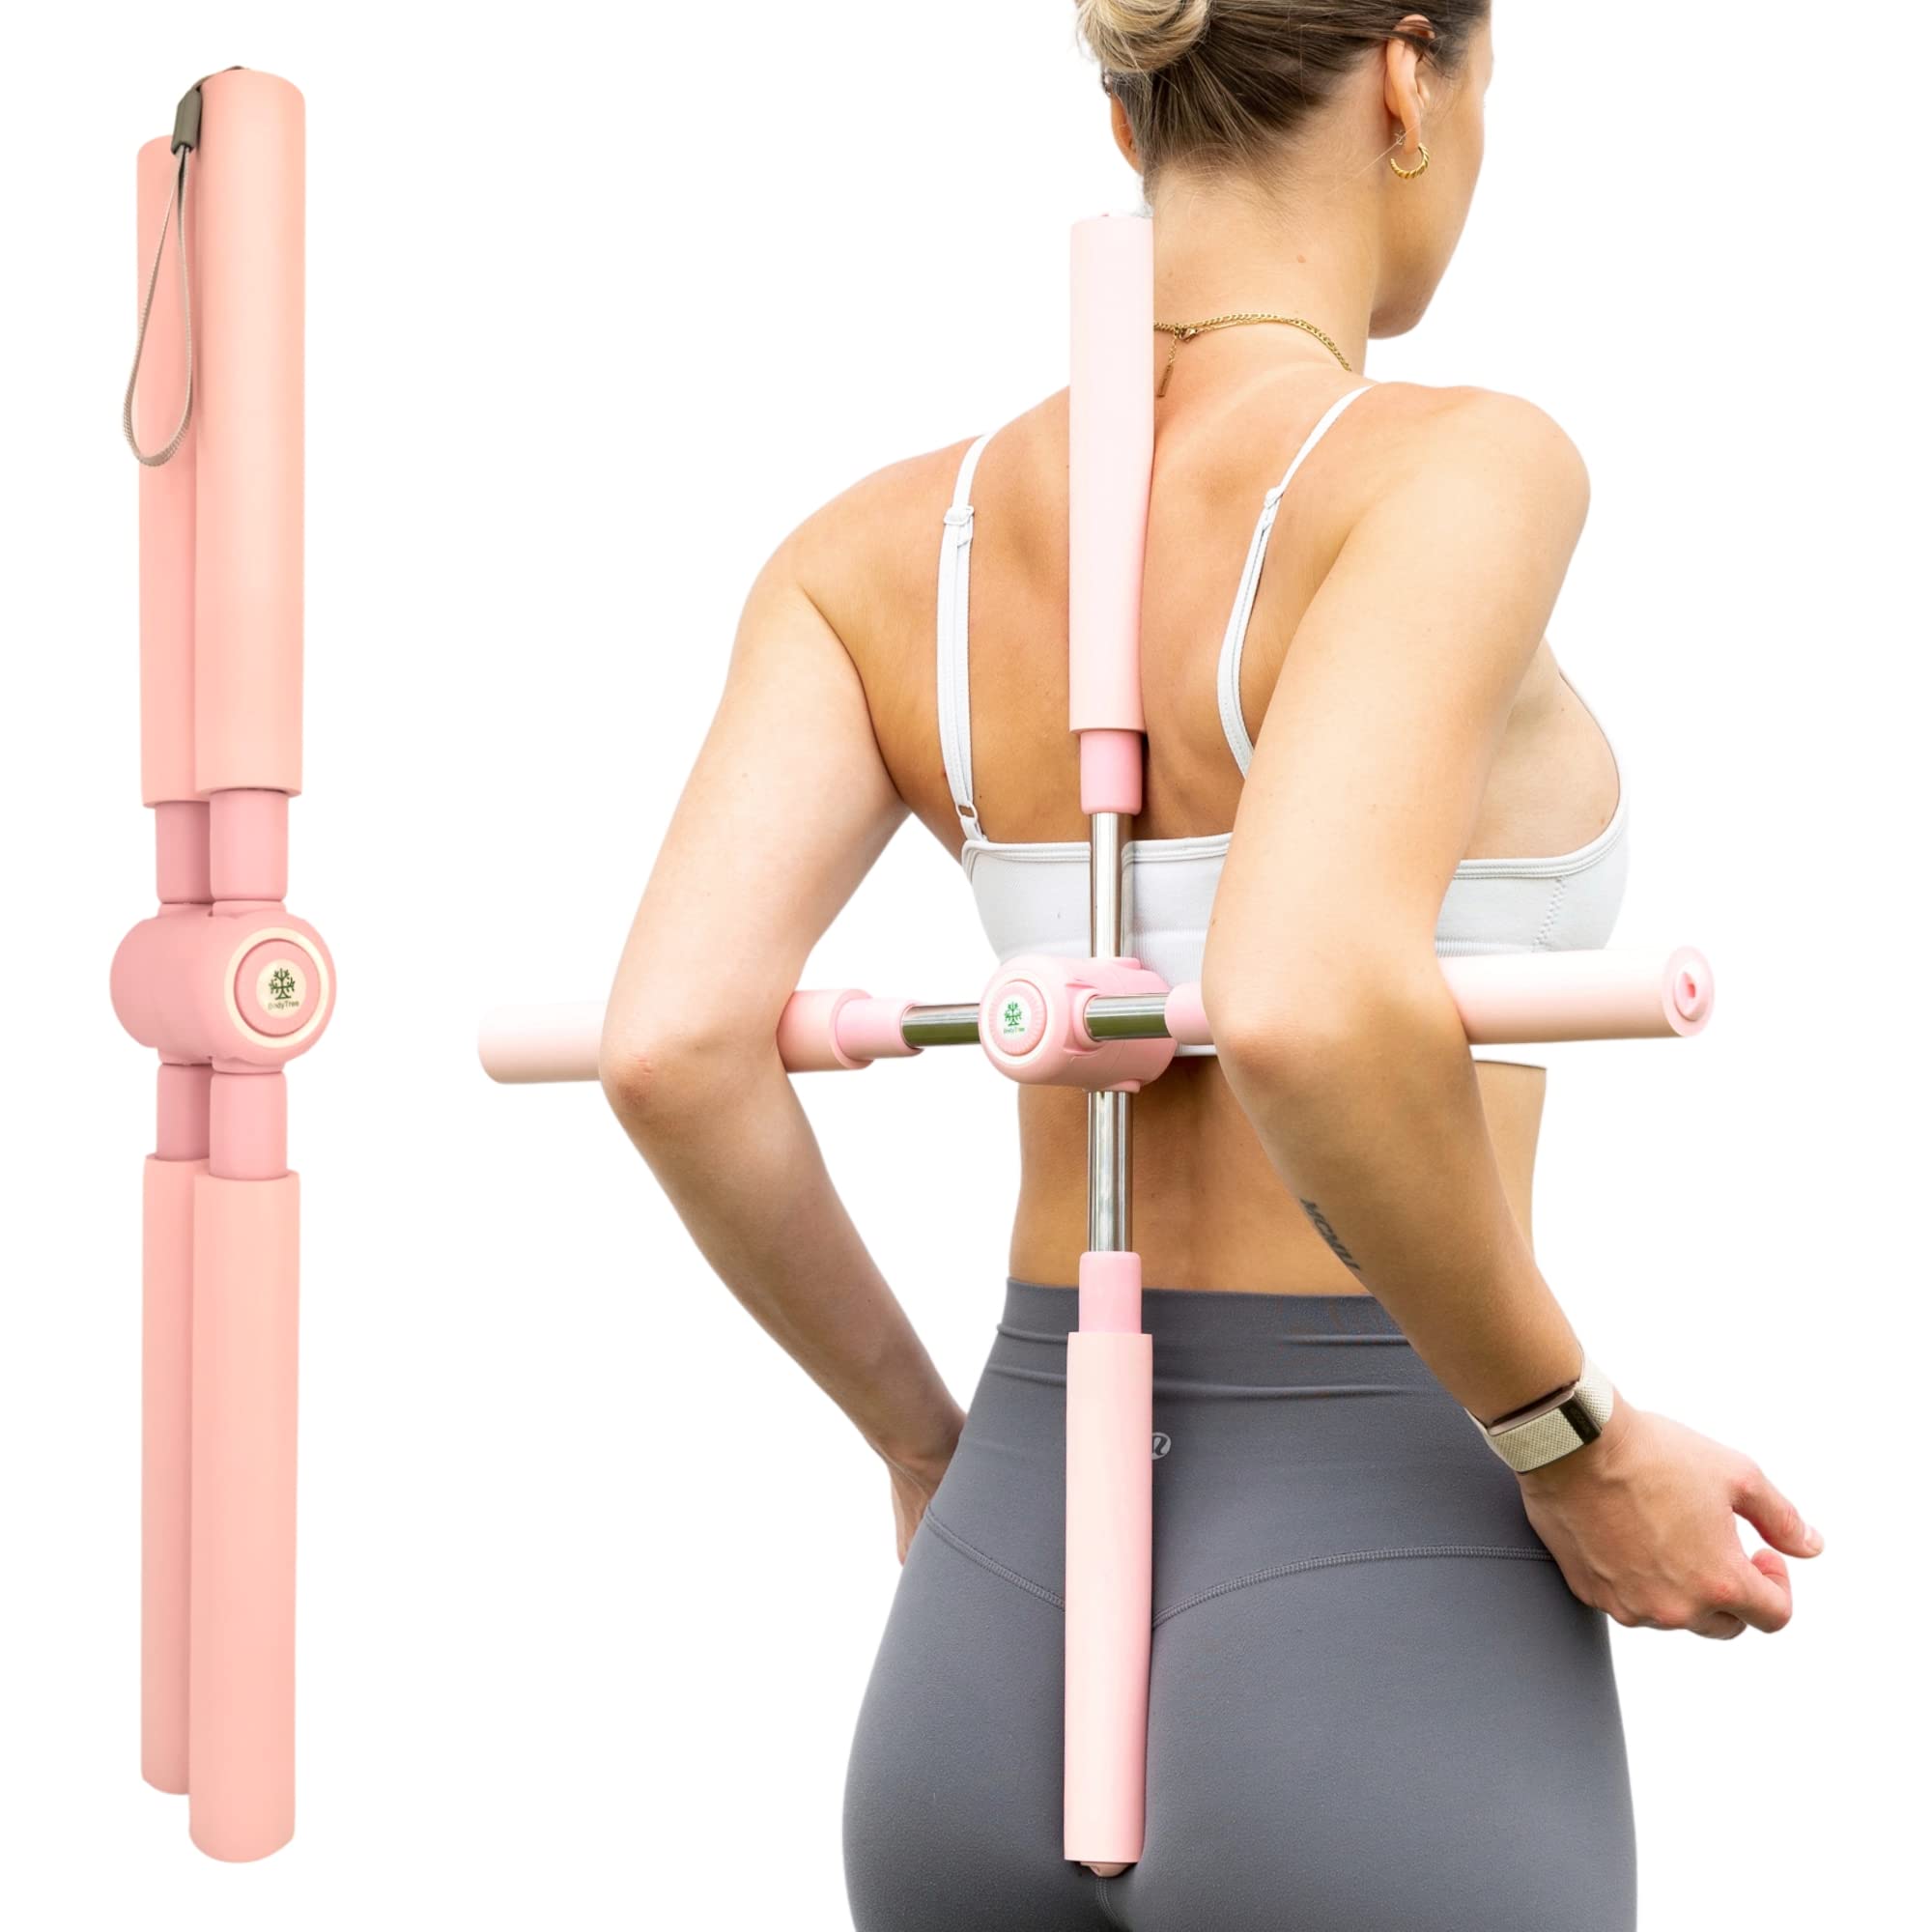 back pain - Is this yoga rod/pilates stick exercise helpful to get better  posture? - Physical Fitness Stack Exchange